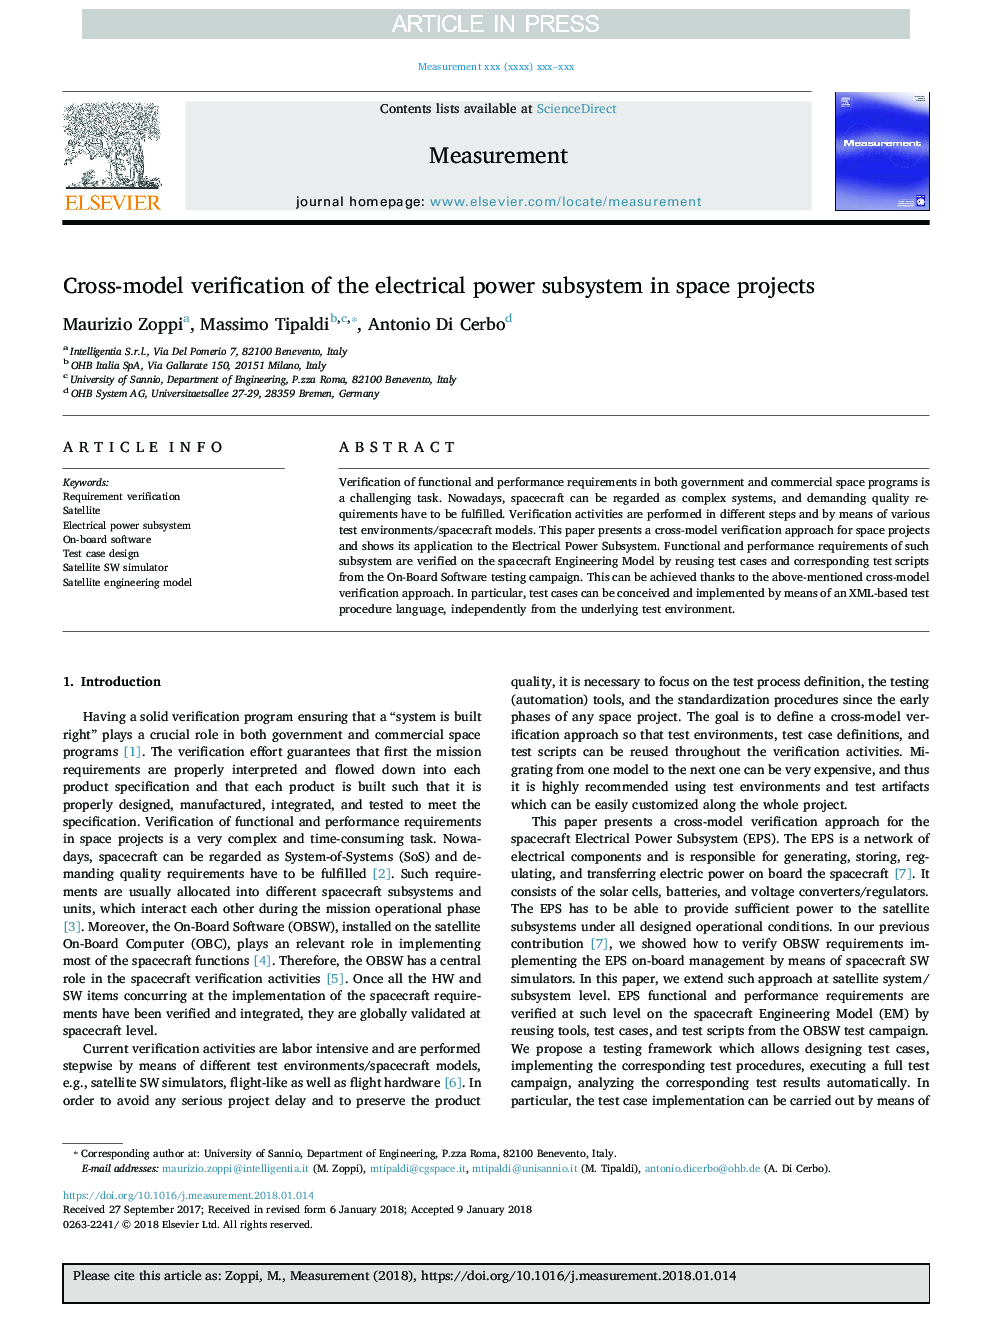 Cross-model verification of the electrical power subsystem in space projects